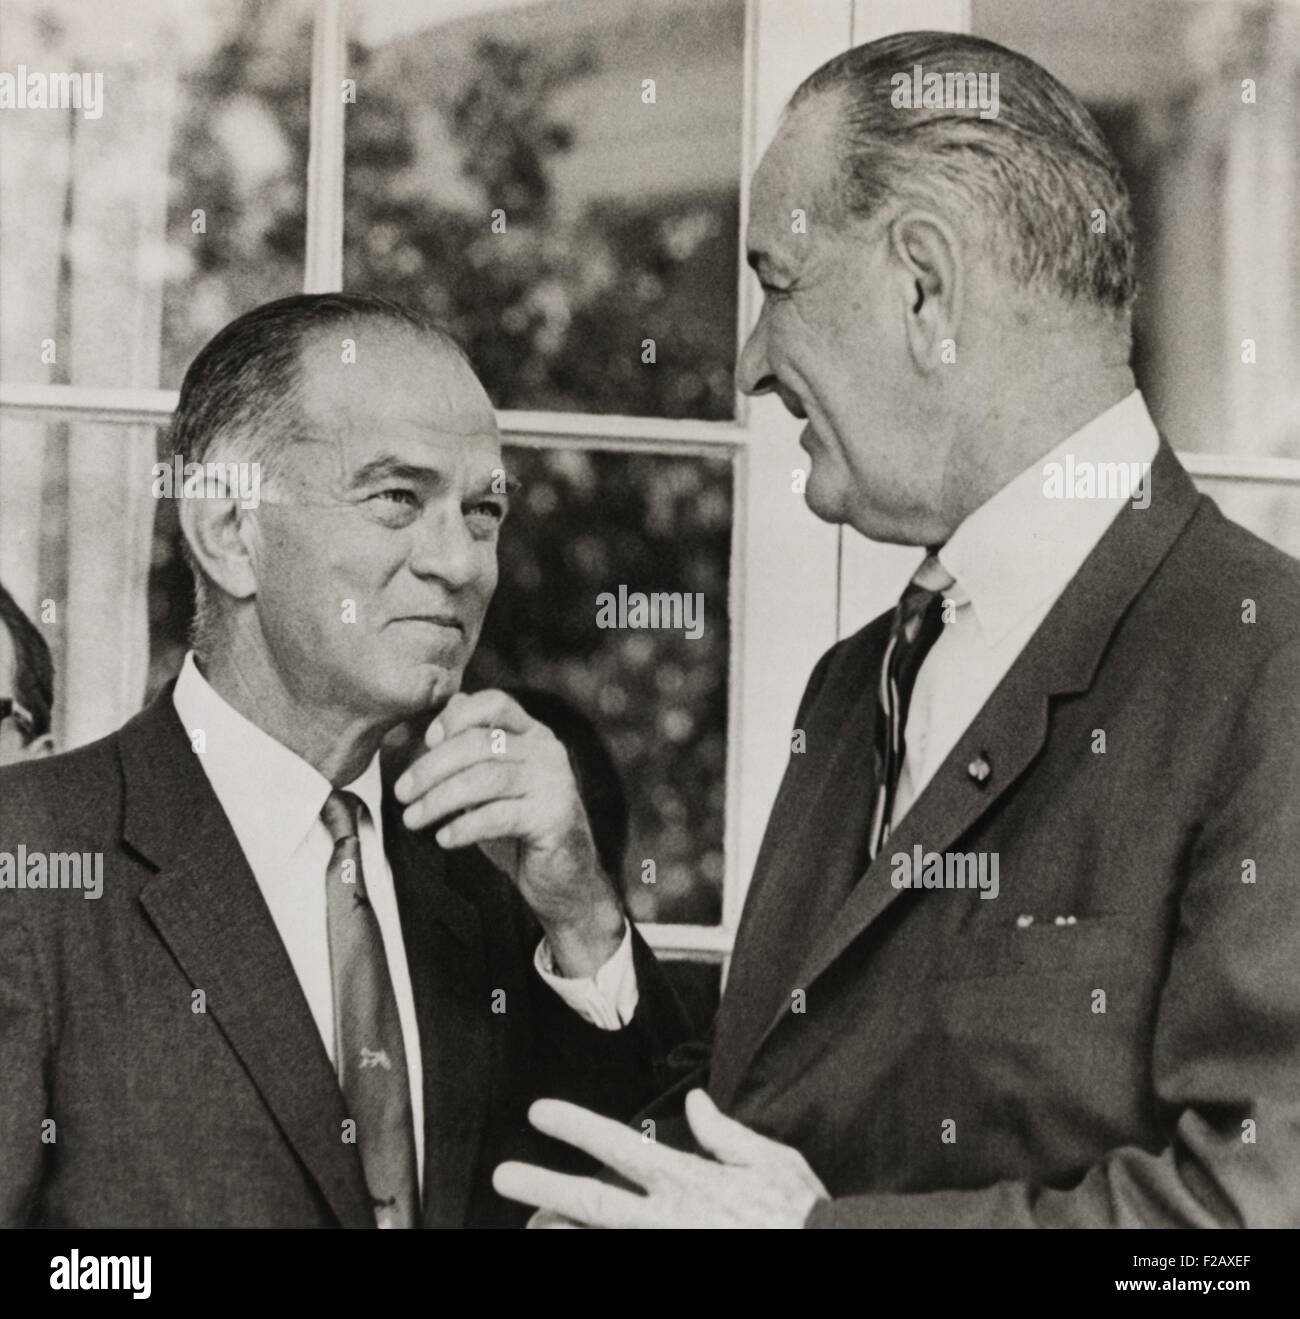 Sen. J. William Fulbright, and President Lyndon Johnson, June 15, 1966. Fulbright was chairman of the Senate Foreign Relations Committee and opposed LBJ's increasing military commitment in South Vietnam. (BSLOC 2015 2 218) Stock Photo